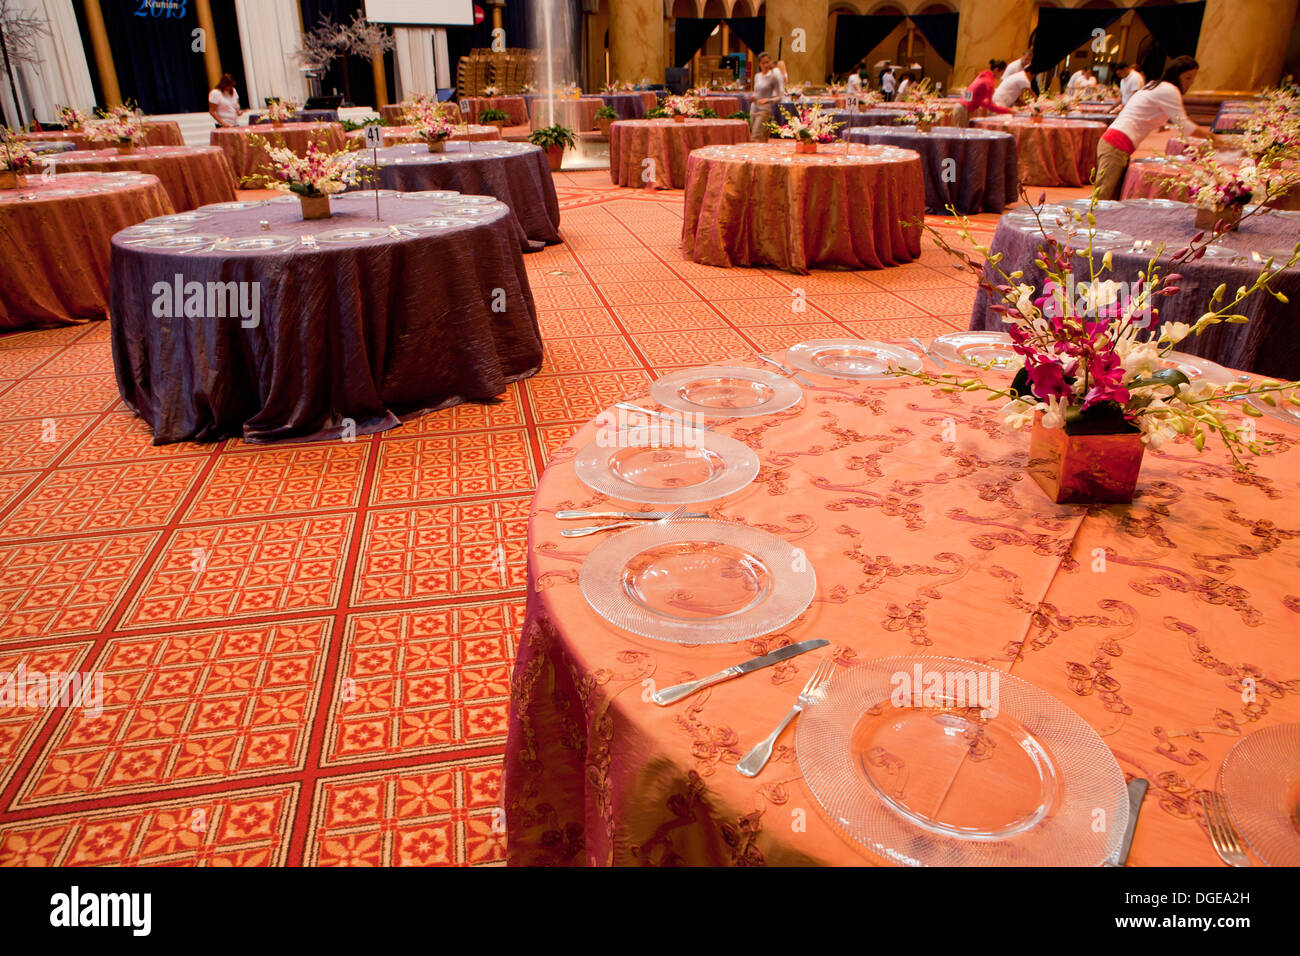 Round dining tables getting prepped for large dinner event Stock Photo